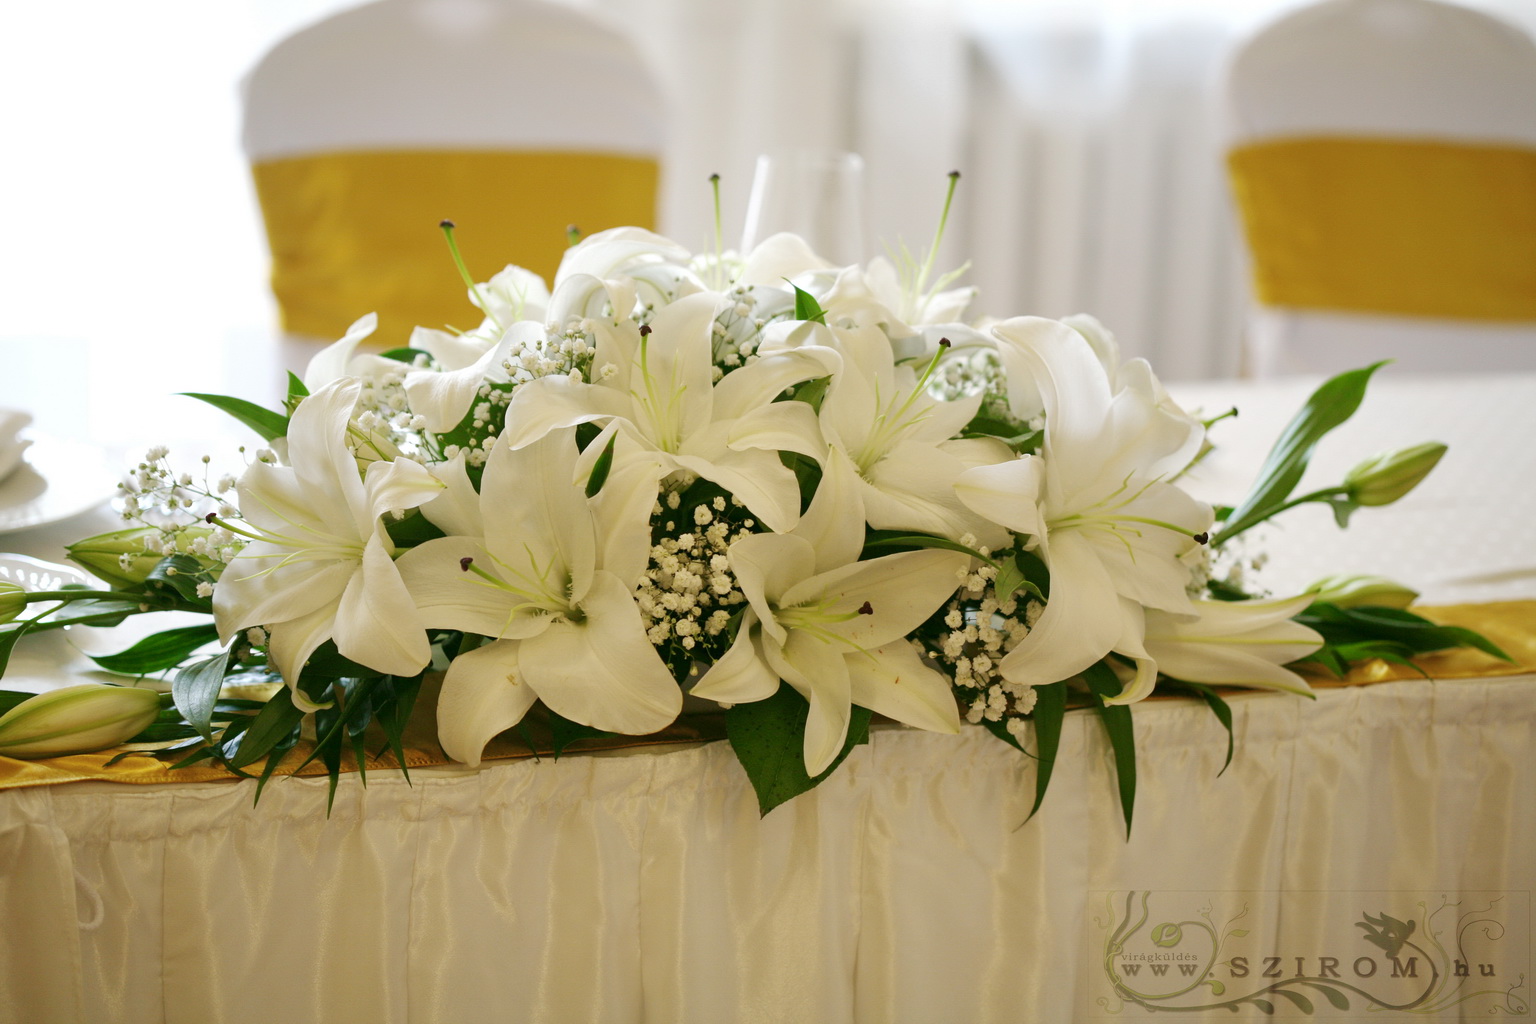 flower delivery Budapest - Main table centerpiece with lilies and baby's breaths, white, Ádám Villa  Budapest, wedding